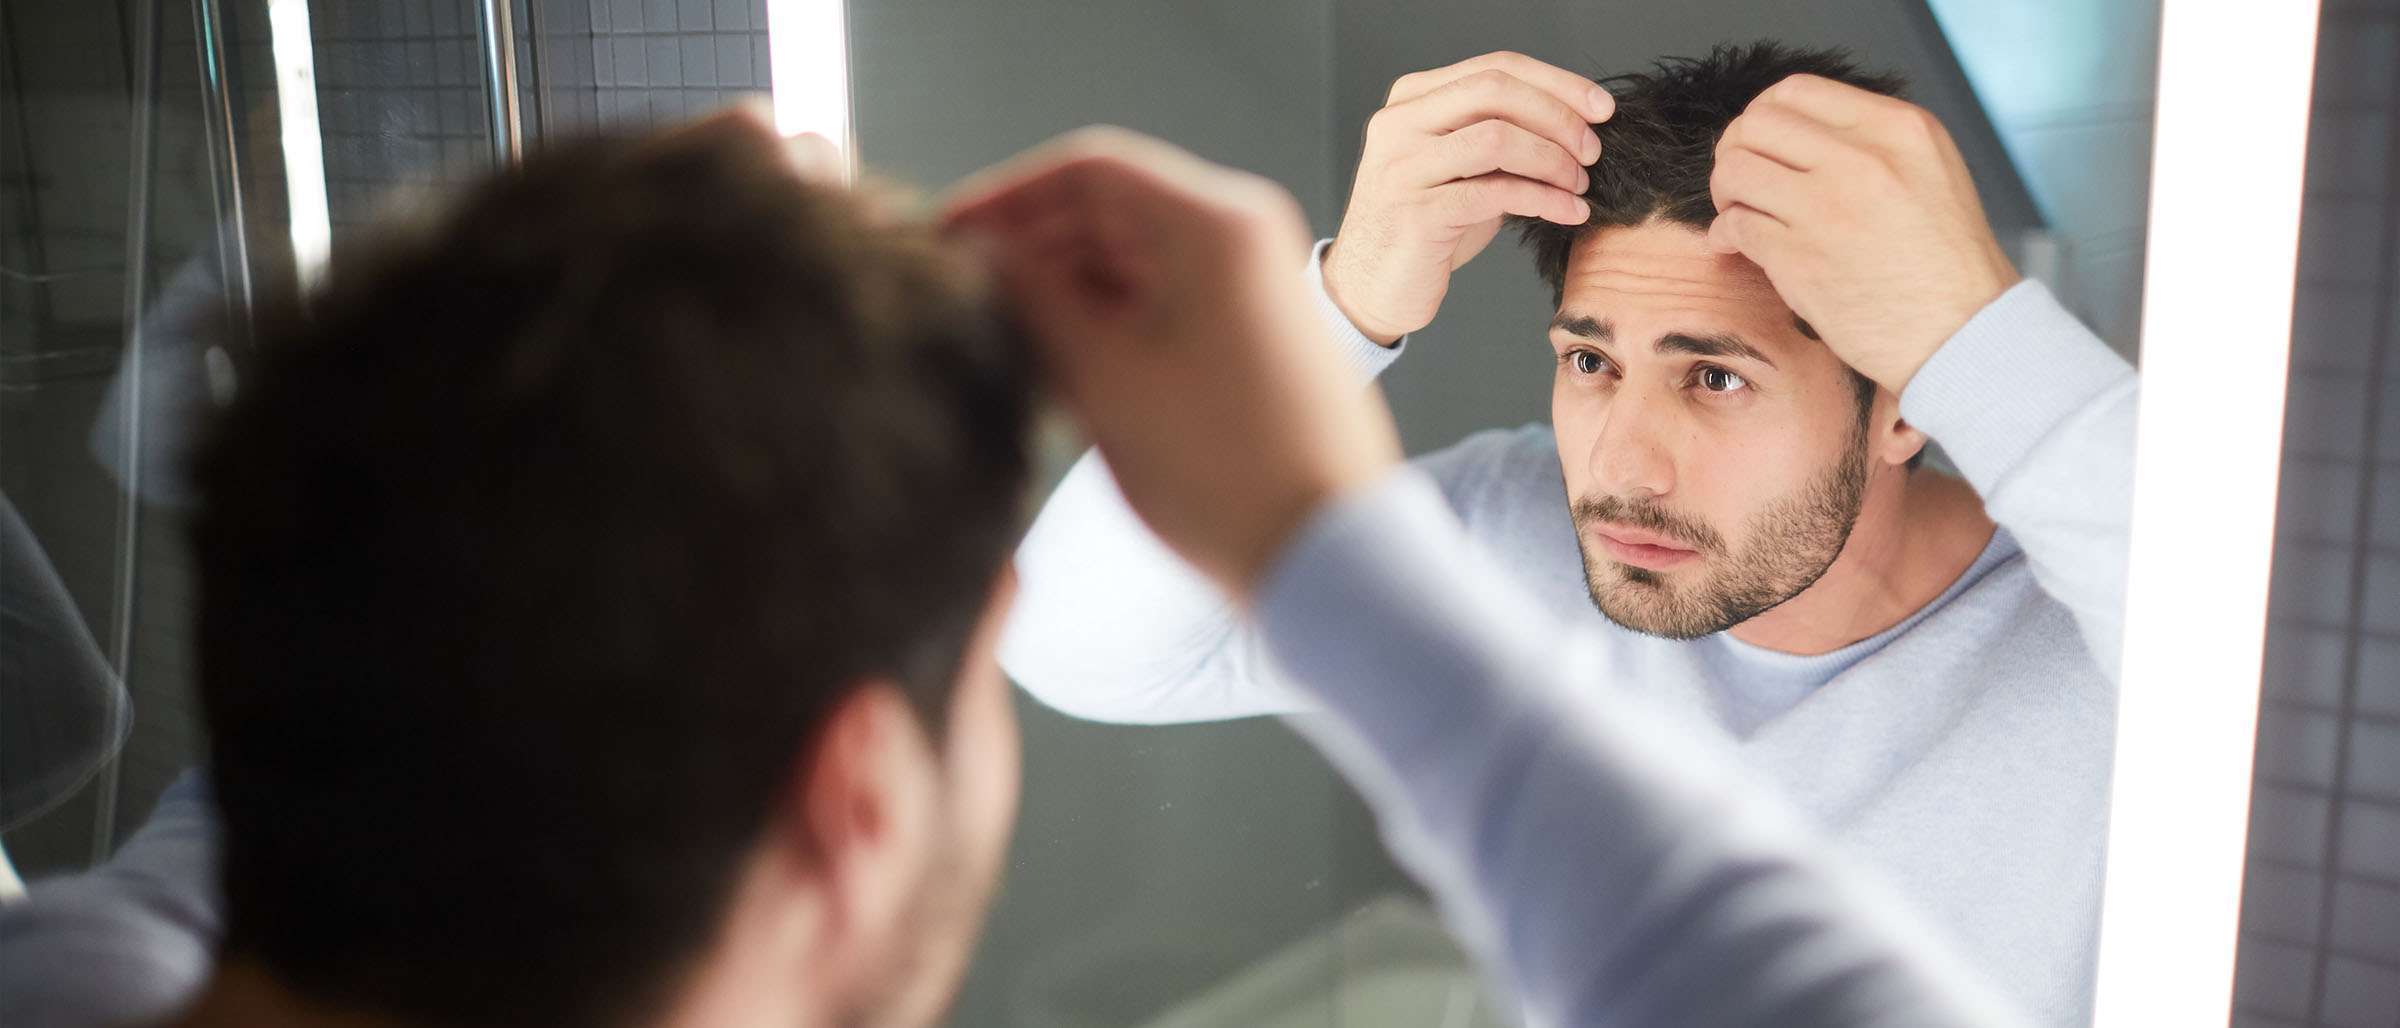 REVERSING HAIR LOSS IN YOUNG ADULTS